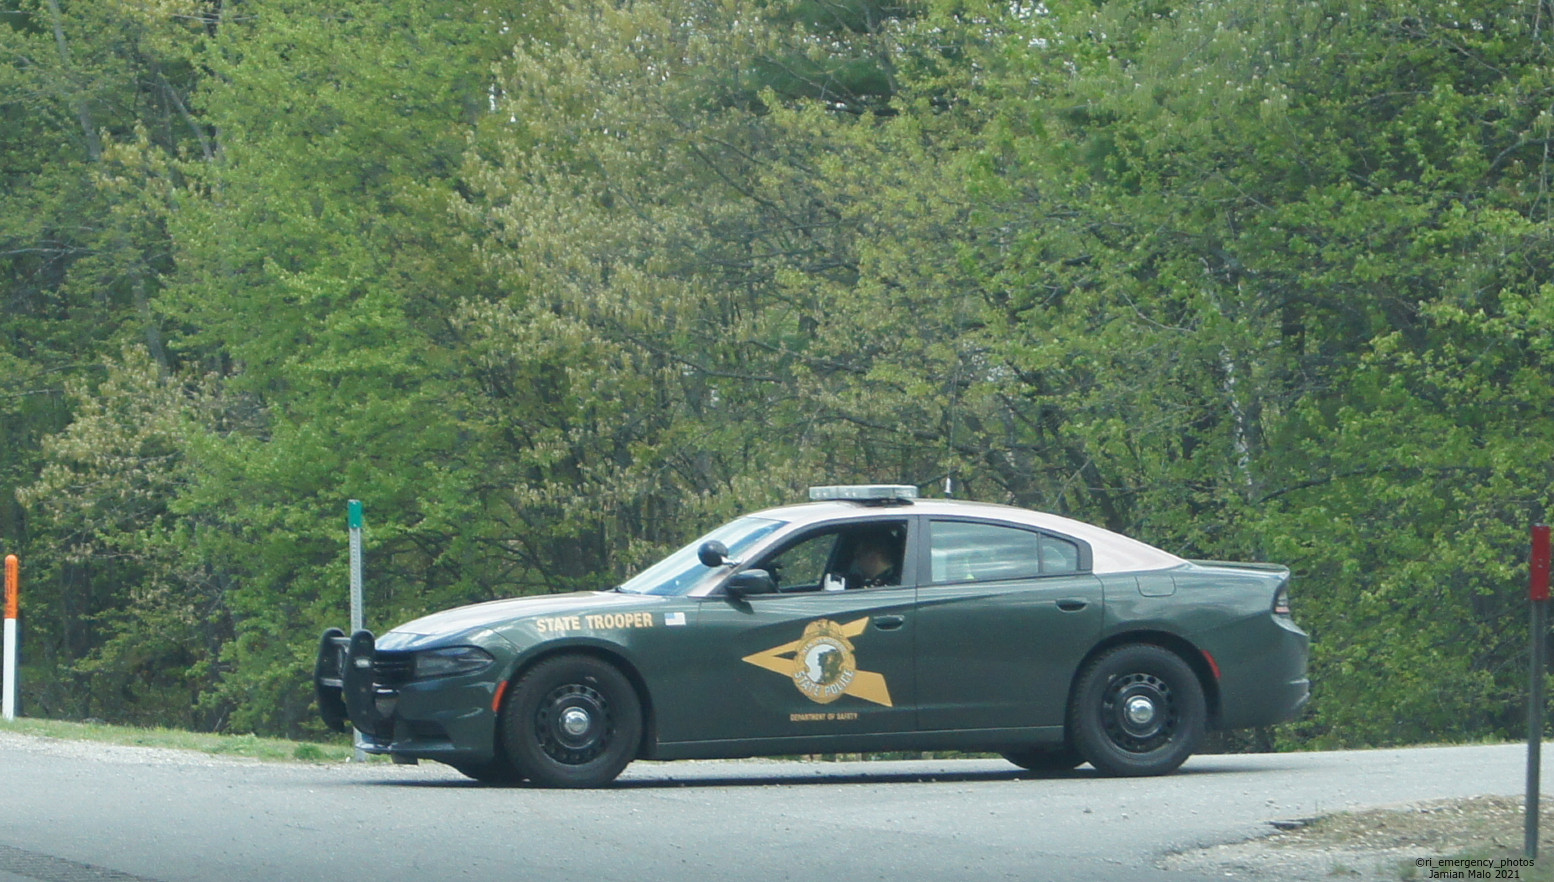 A photo  of New Hampshire State Police
            Cruiser 423, a 2015-2019 Dodge Charger             taken by Jamian Malo